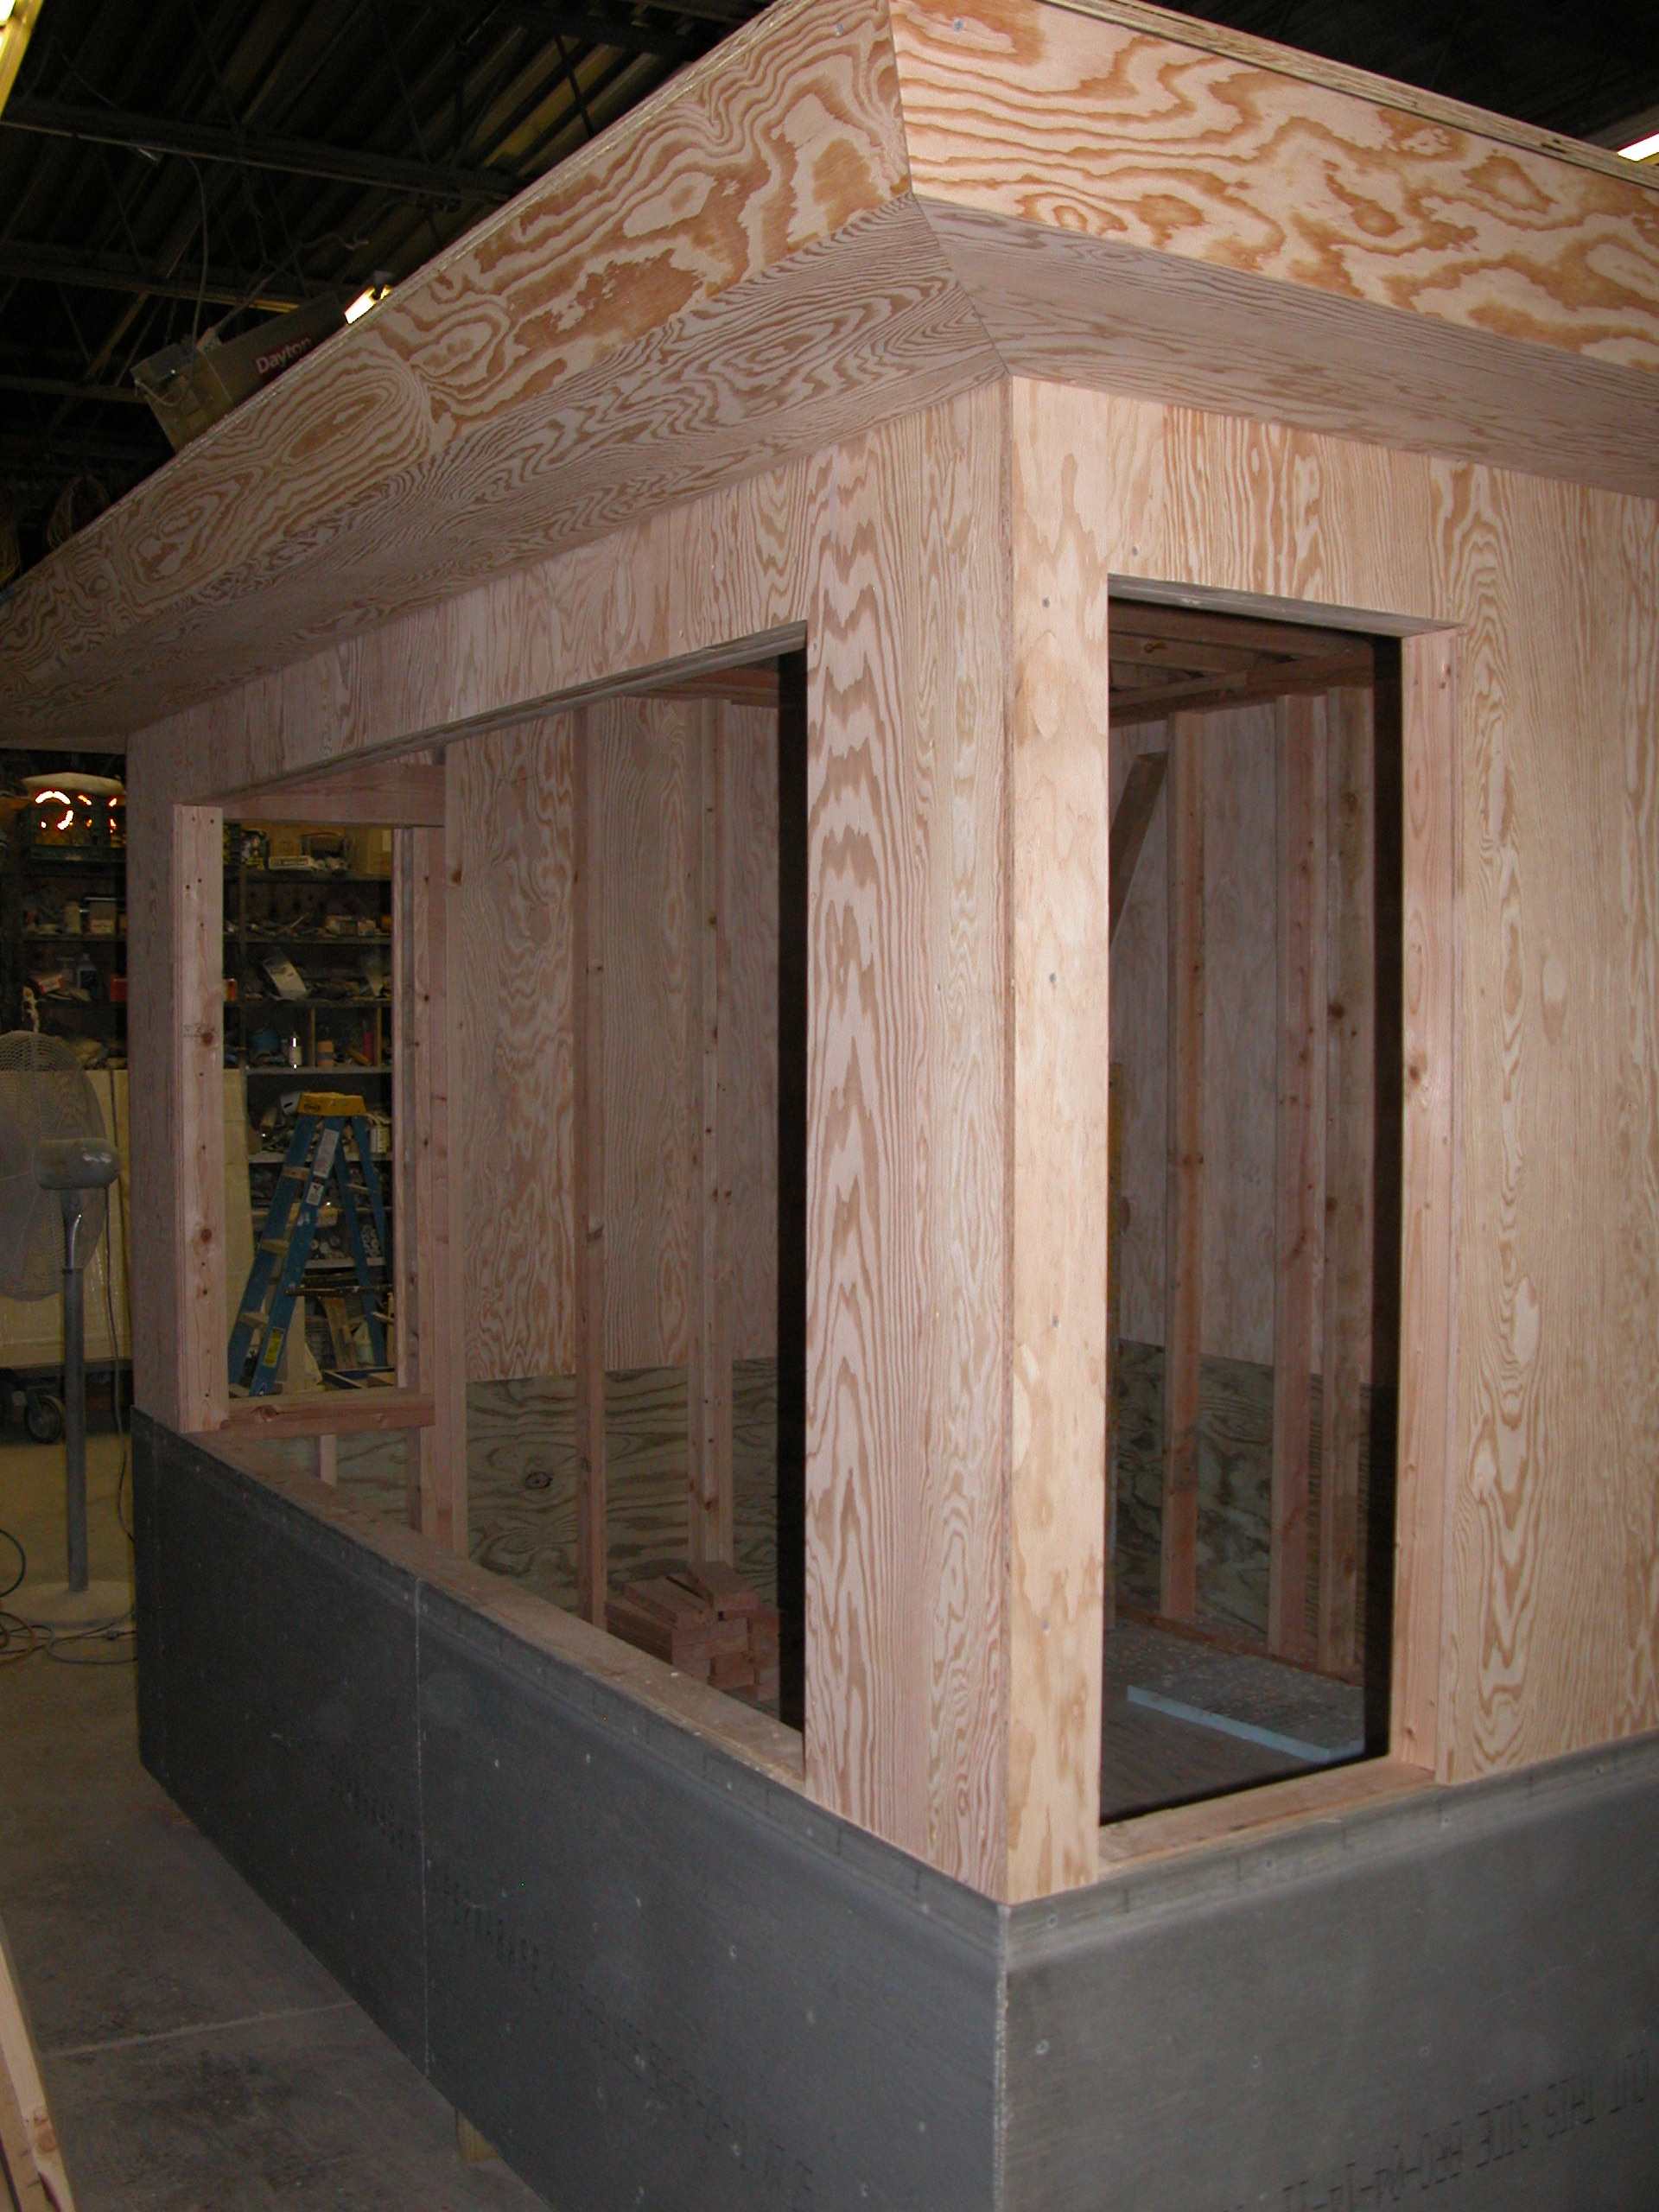 In-progress photo of the wooden security booth at Fordham University, showing the construction of a new wooden structure for security purposes.